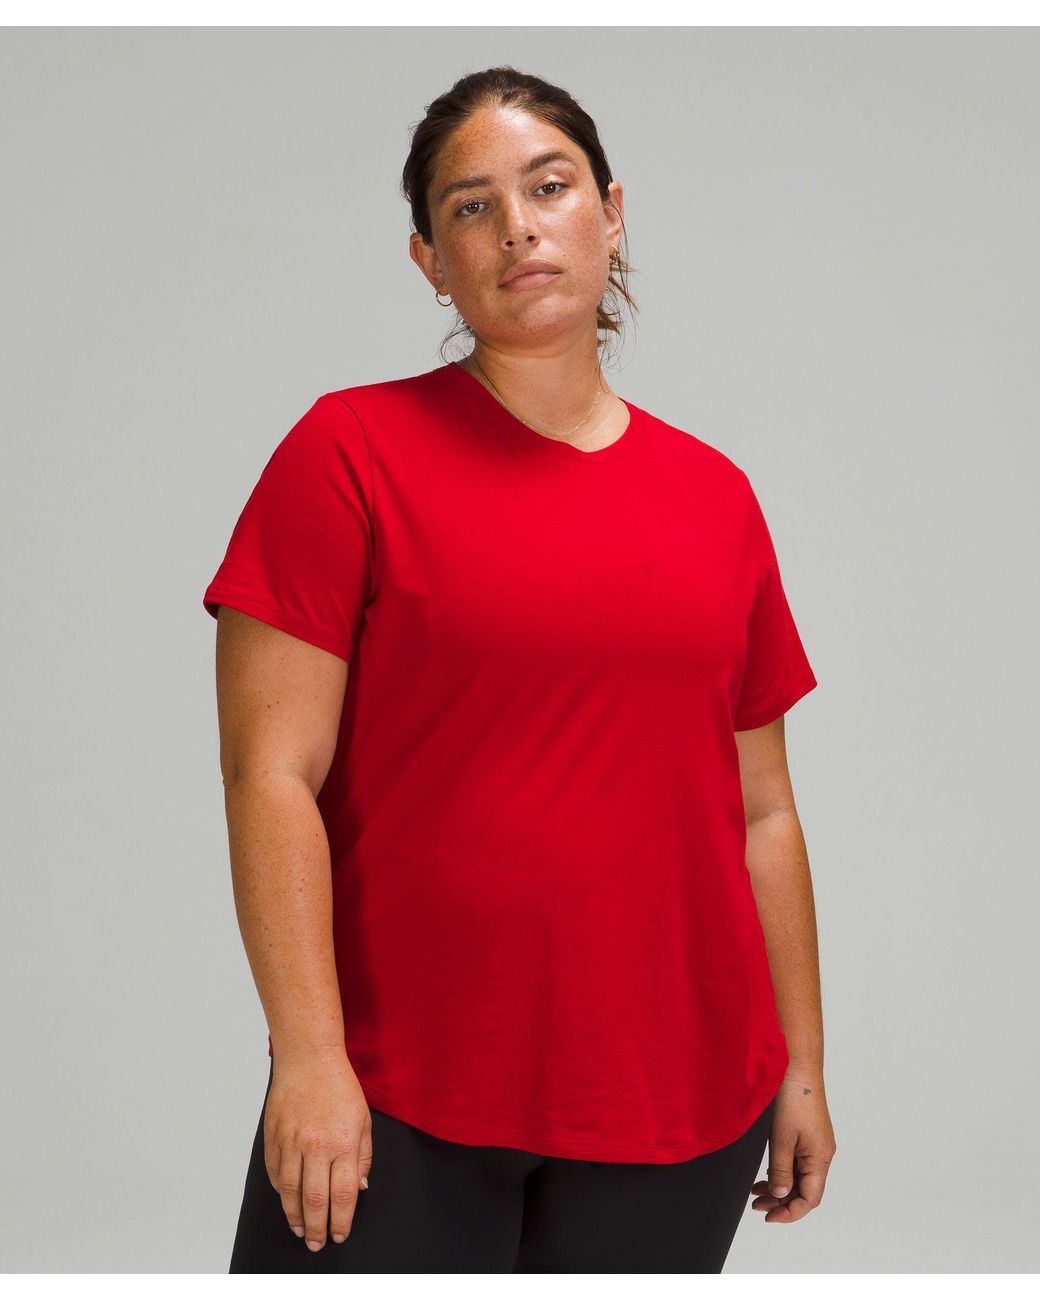 lululemon athletica Love Crew T-shirt in Red